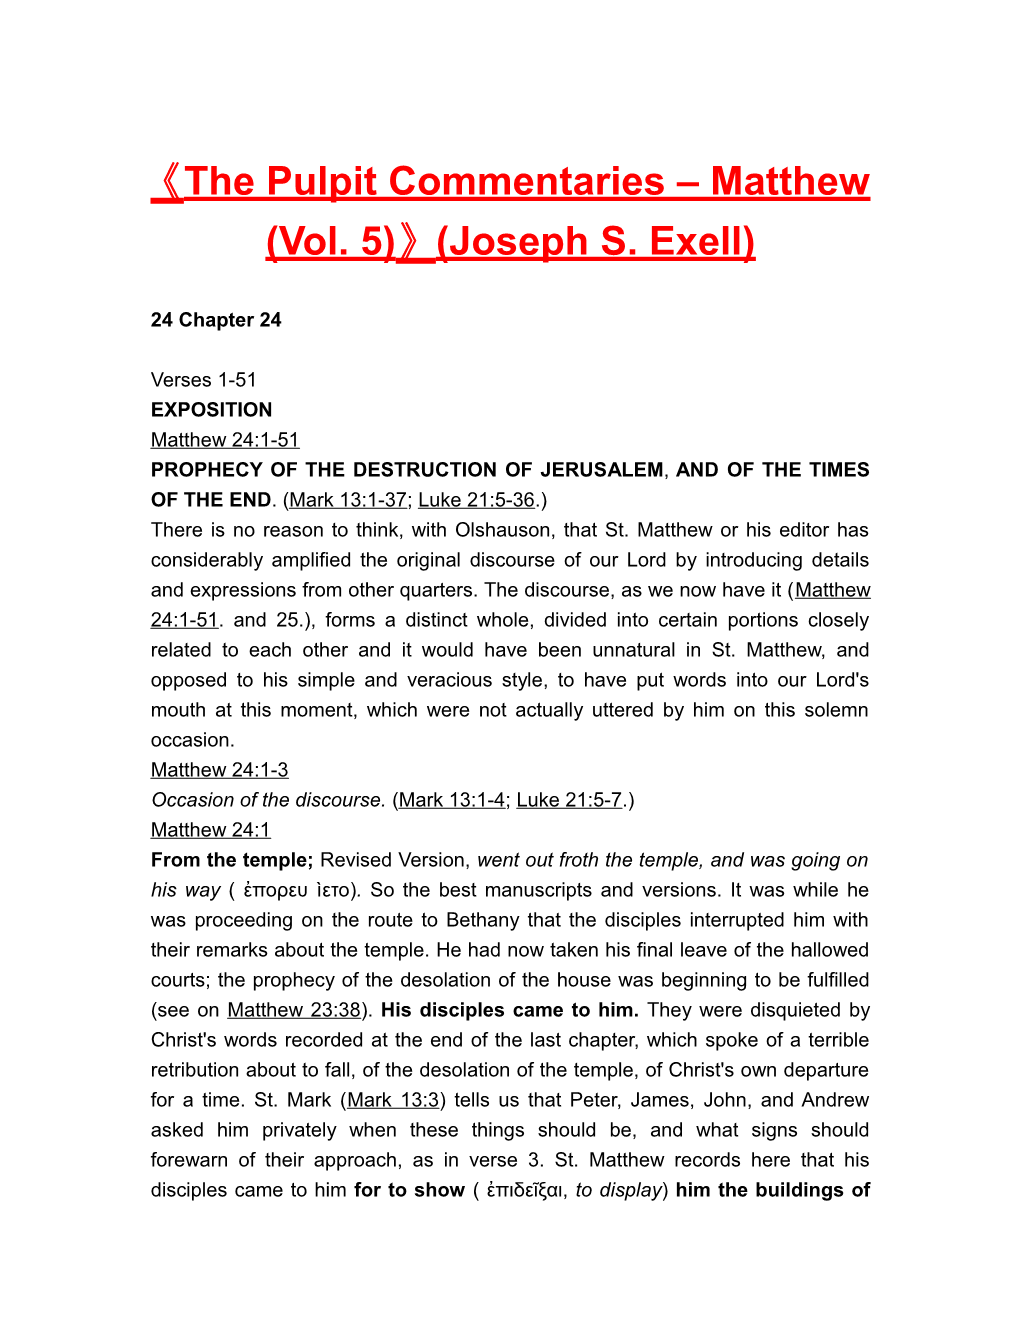 The Pulpit Commentaries Matthew (Vol. 5) (Joseph S. Exell)